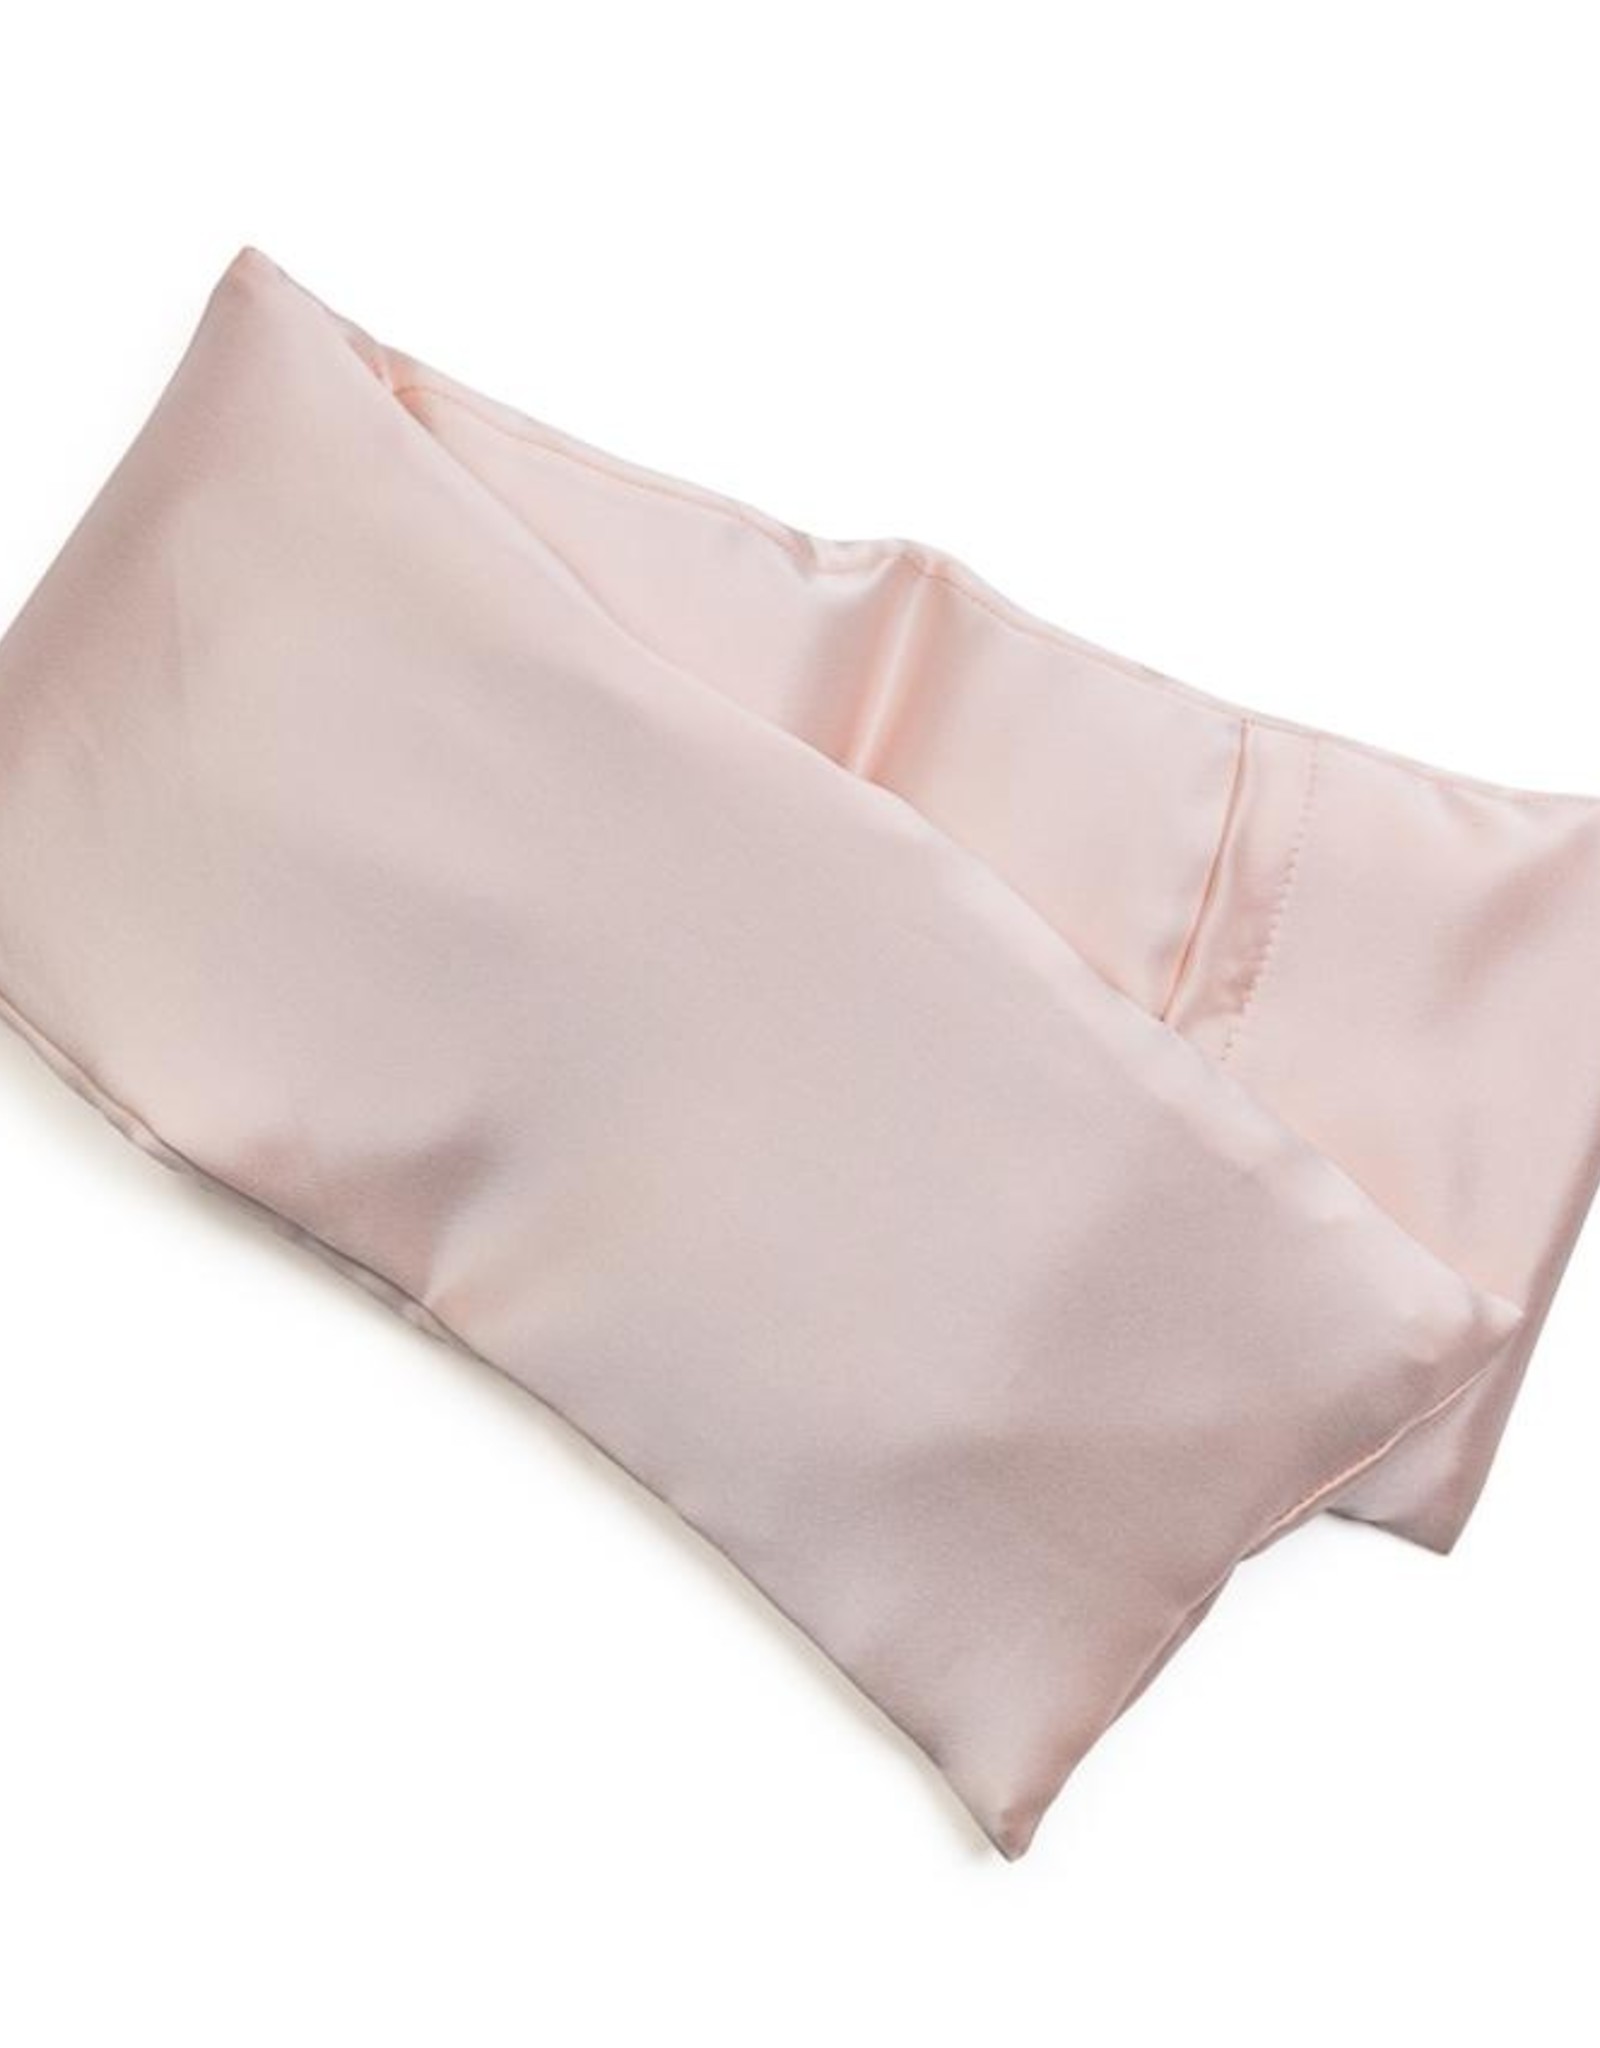 Elizabeth W Hot/Cold Flaxseed Pack, Pink Silk